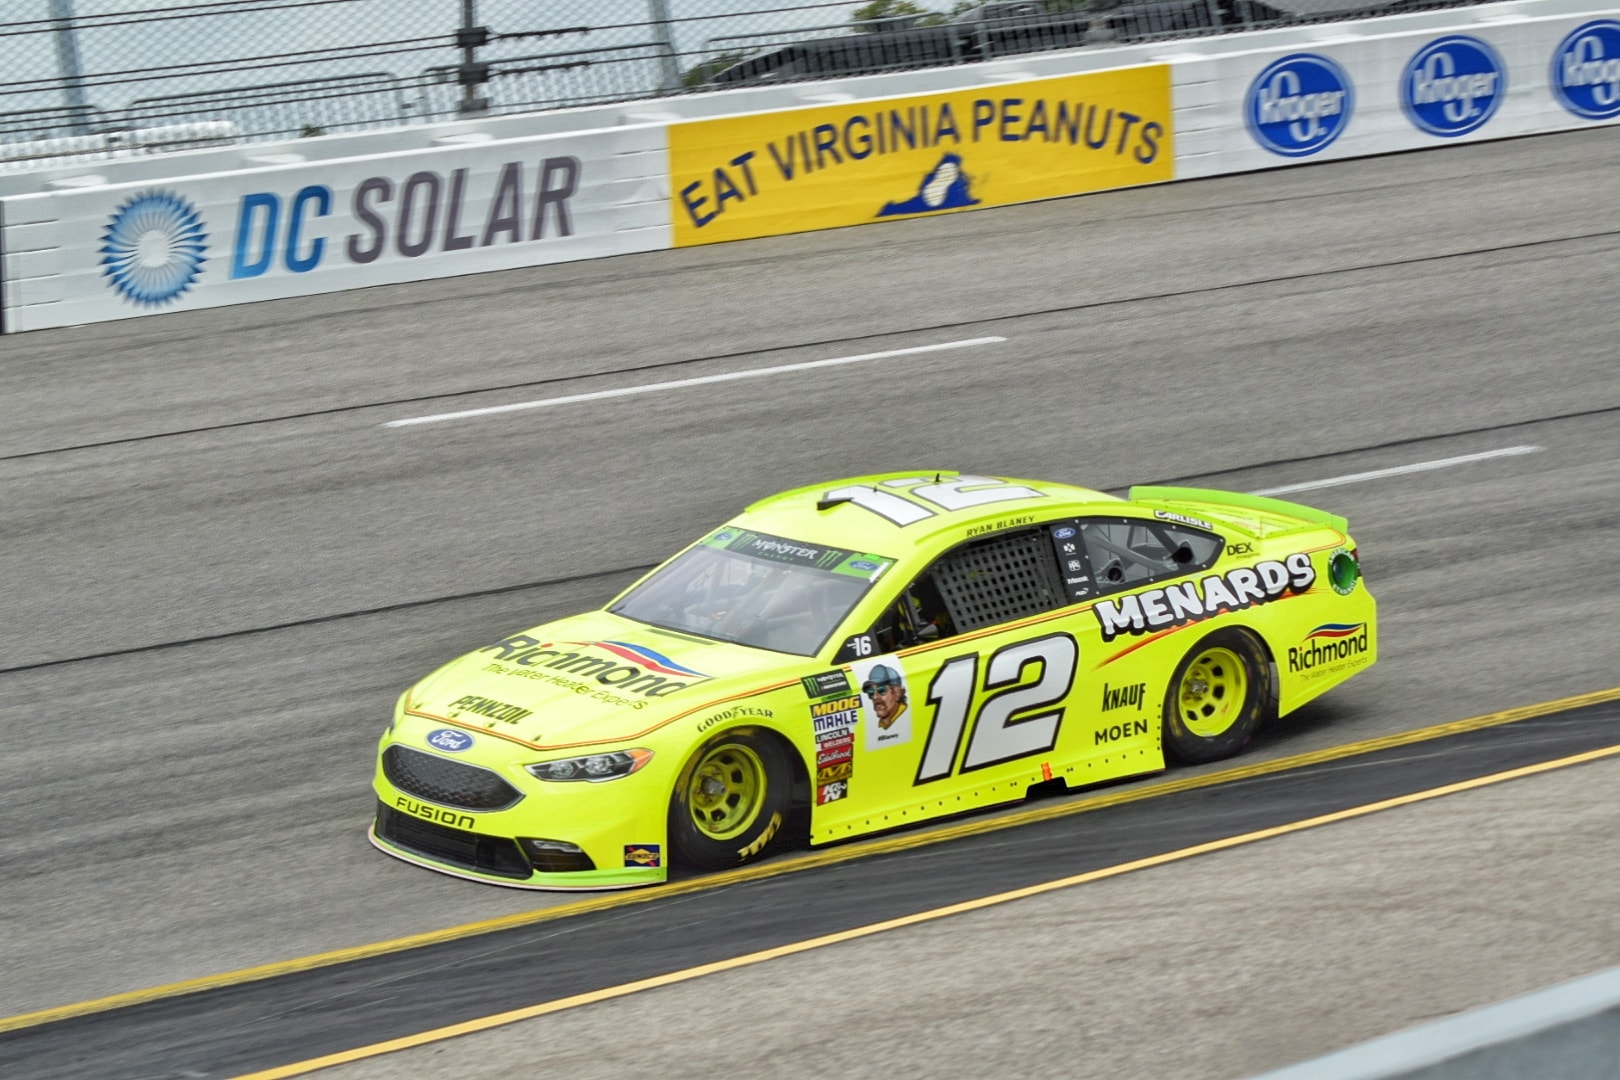 Bar none, Blaney's No. 12 Ford's colors are quite unmistakable. (Photo Credit: Daniel Overbey/TPF)